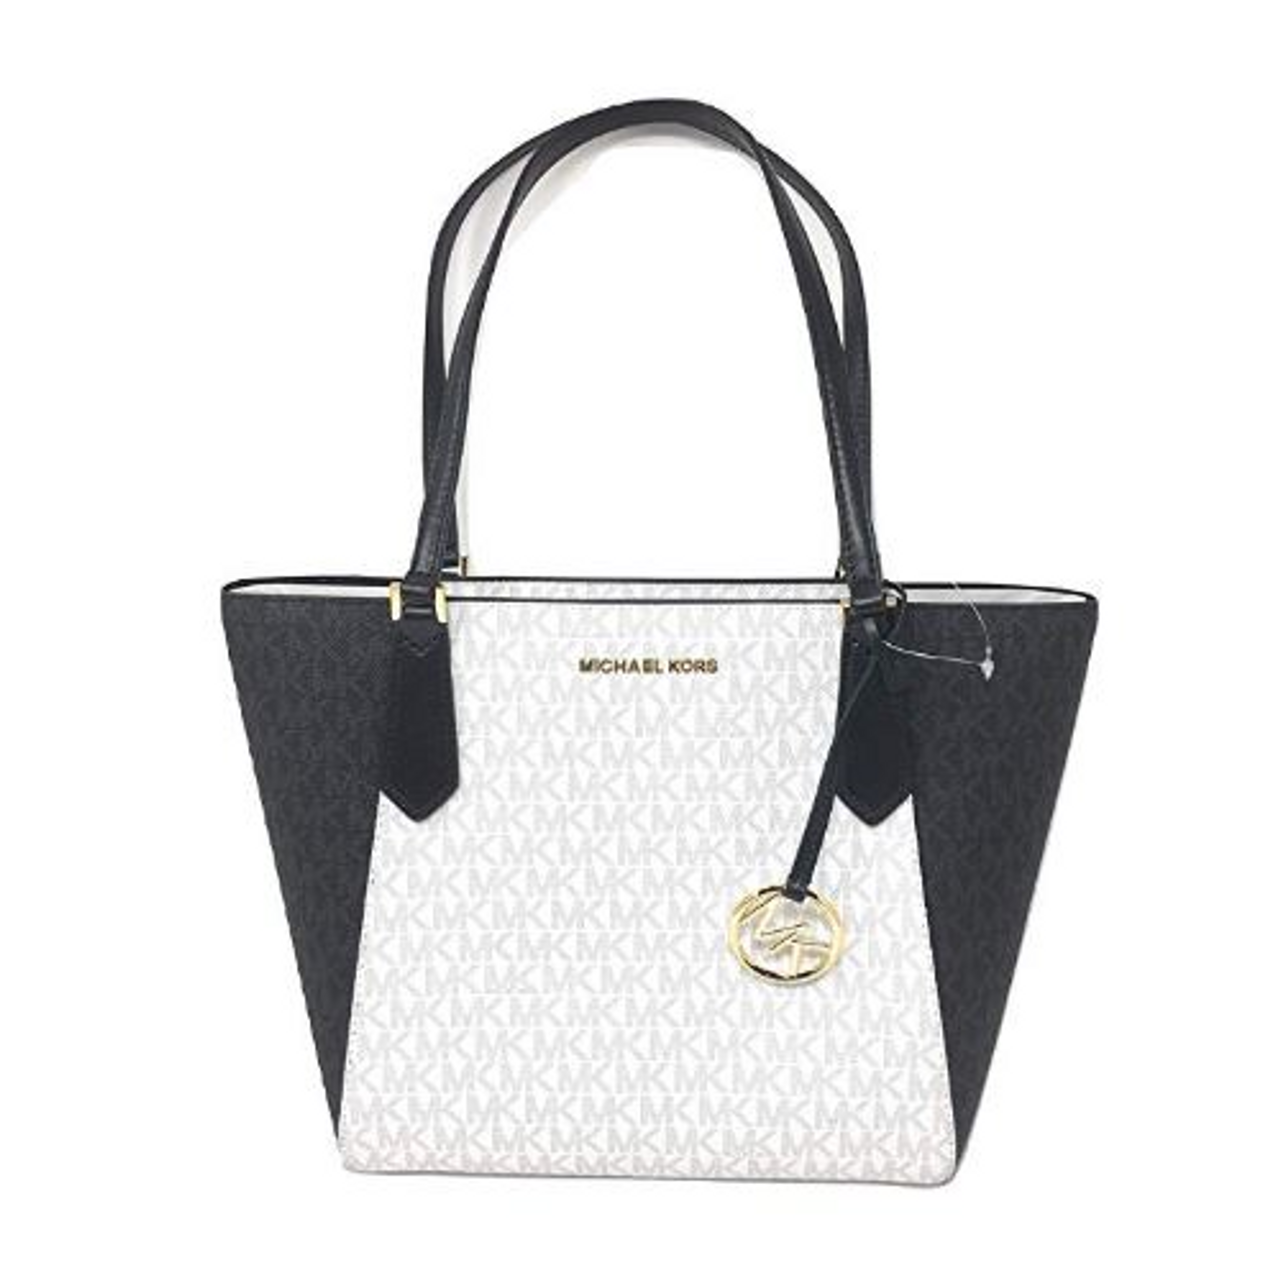 Michael Kors Kimberly Small Bonded Tote PVC Leather Shoulder Bag Bright  White - AllGlitters